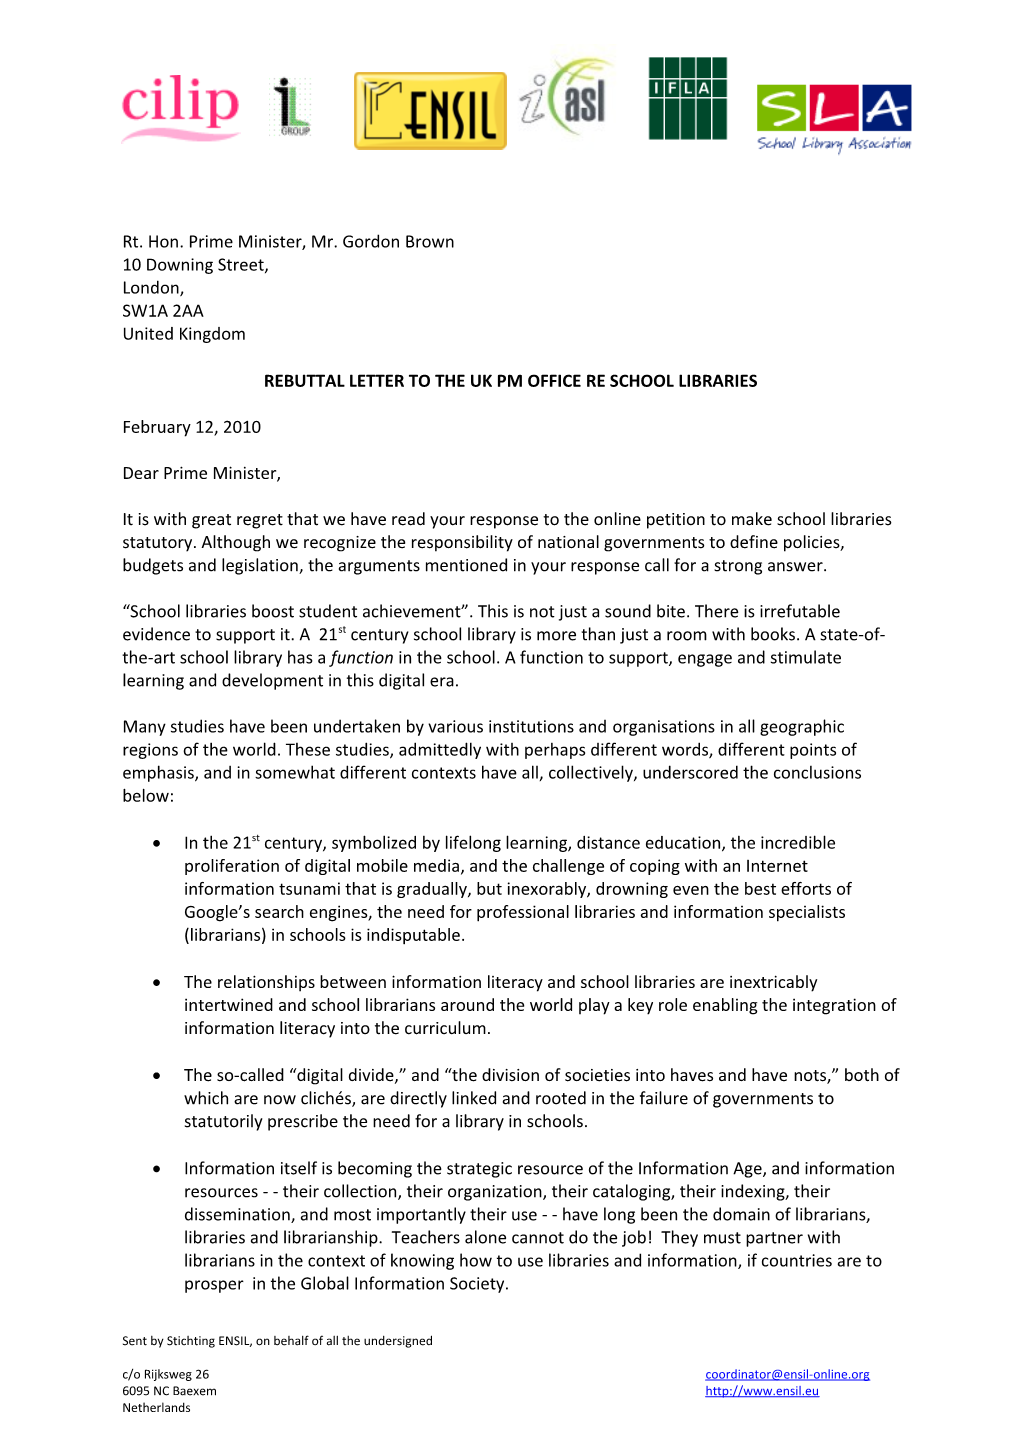 Rebuttal Letter to the Uk Pm Office Re School Libraries